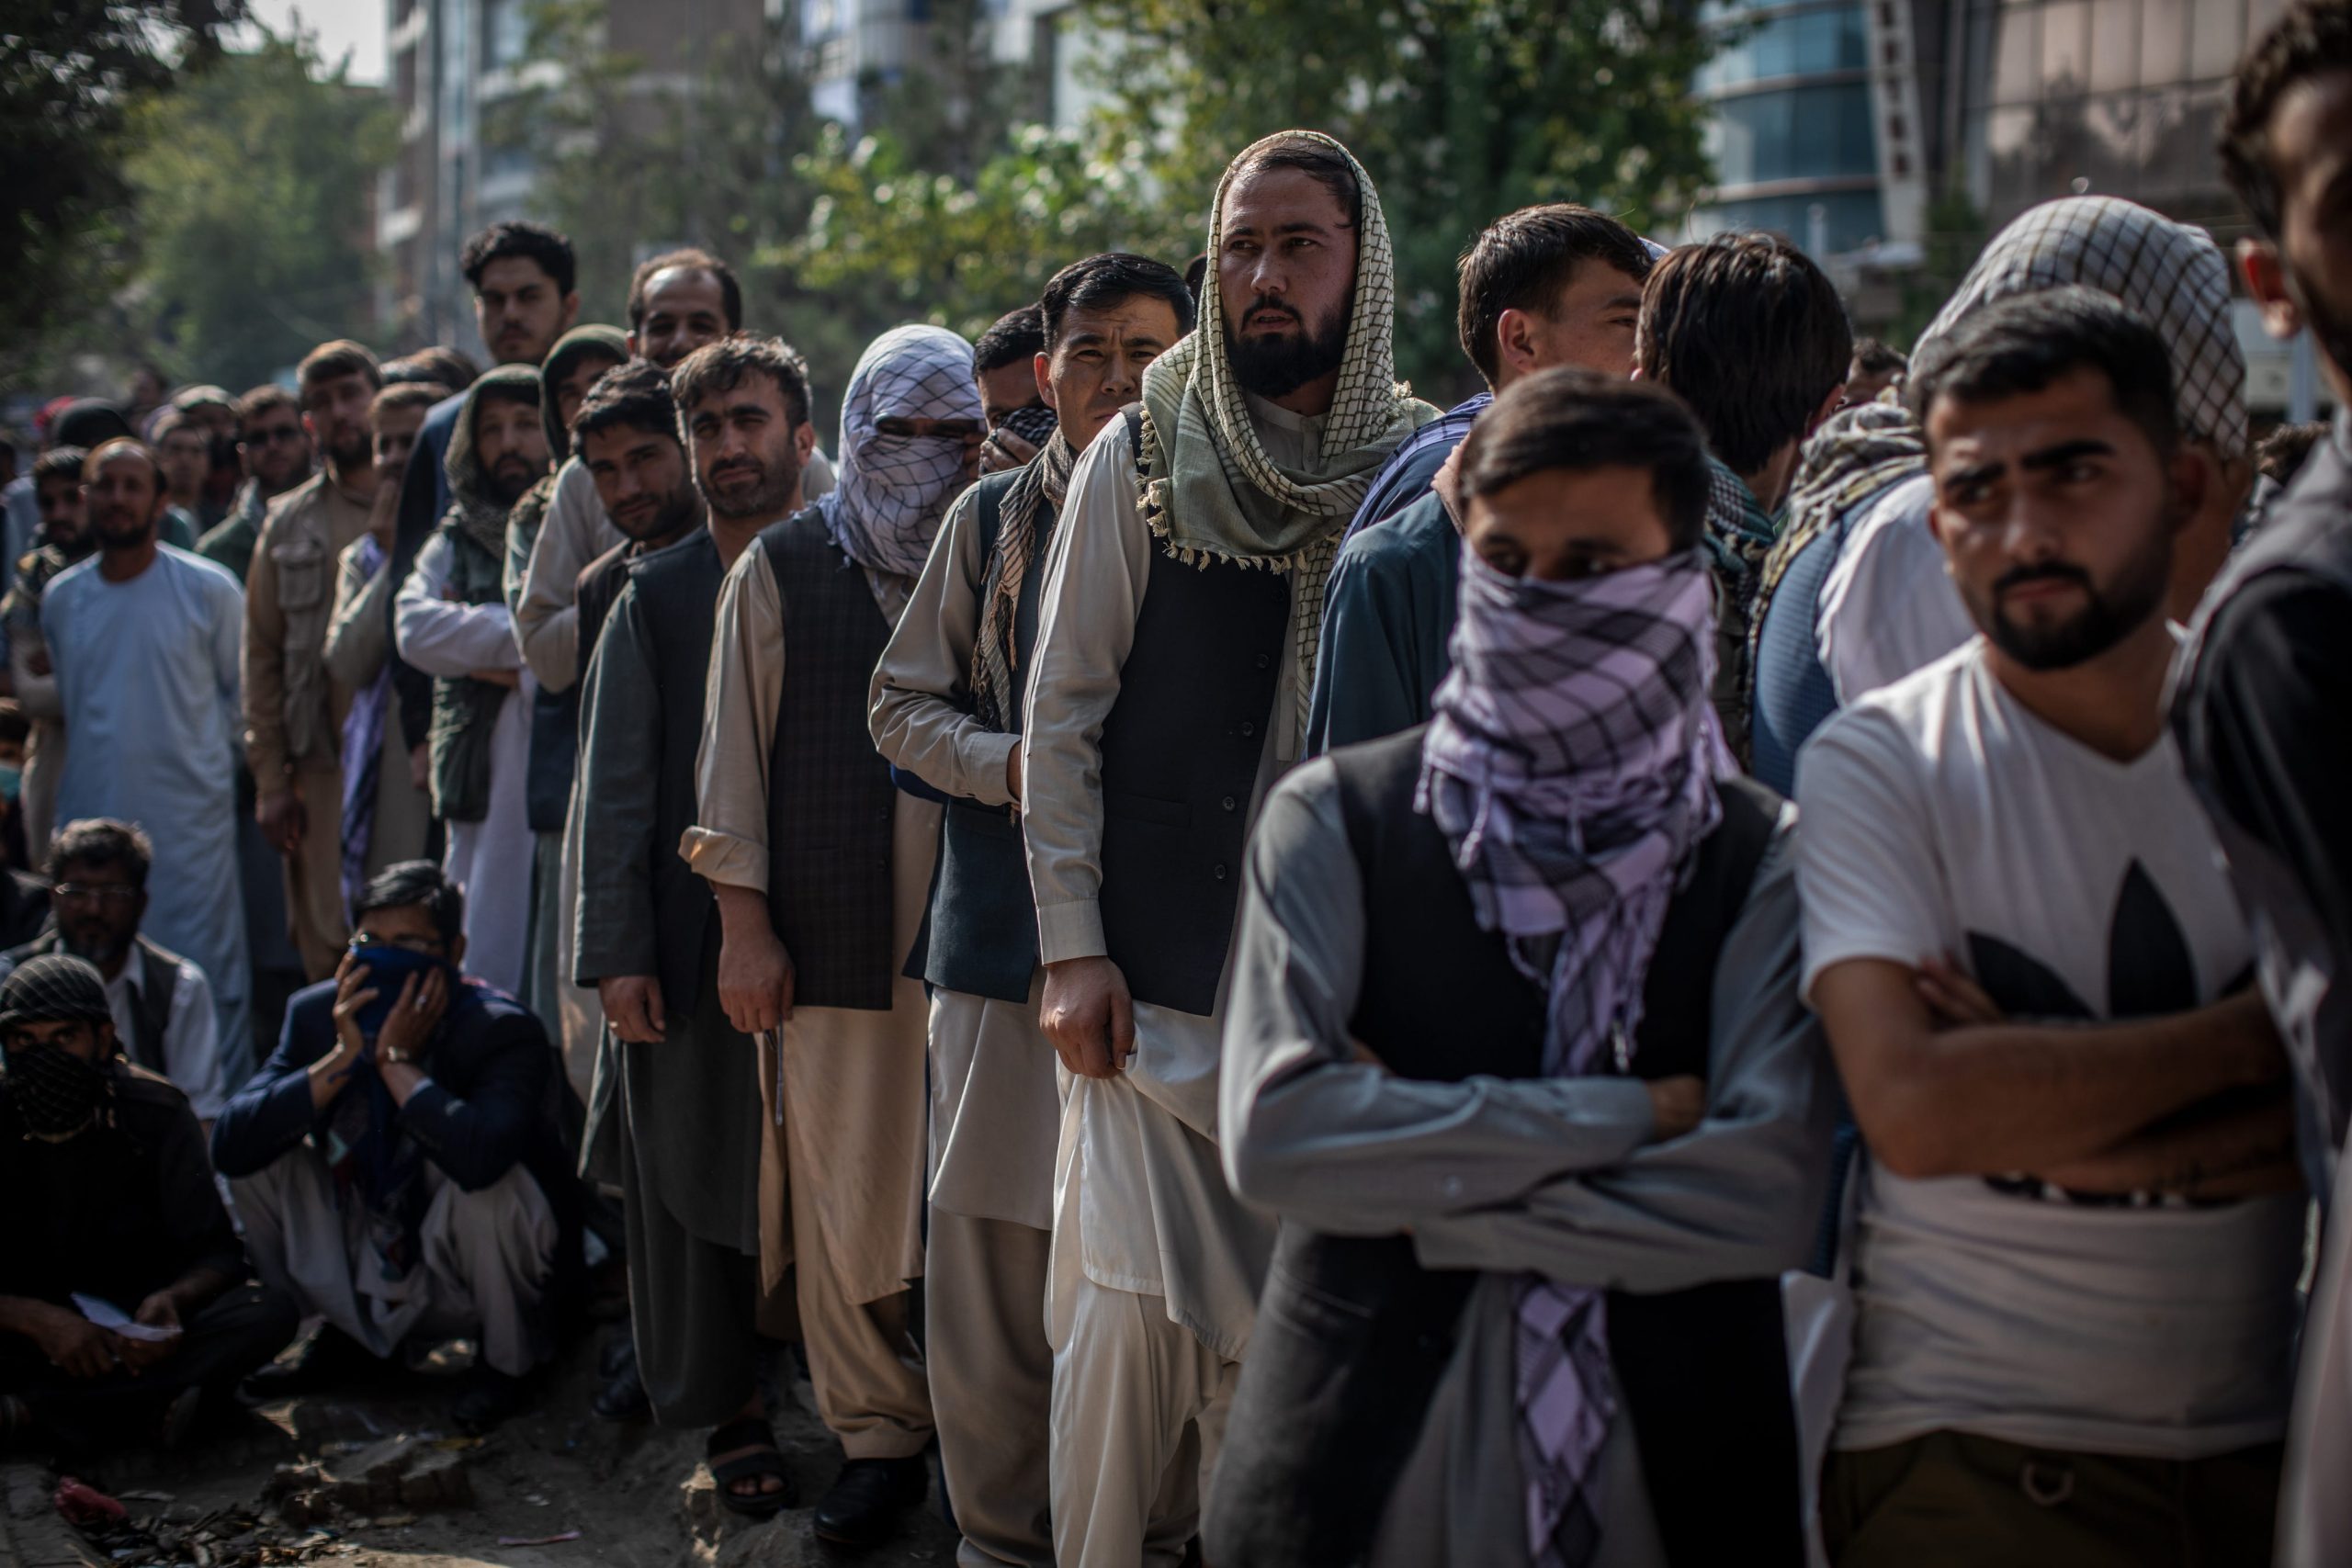 A long row of men stand in line outdoors in Kabul, Afghanistan.